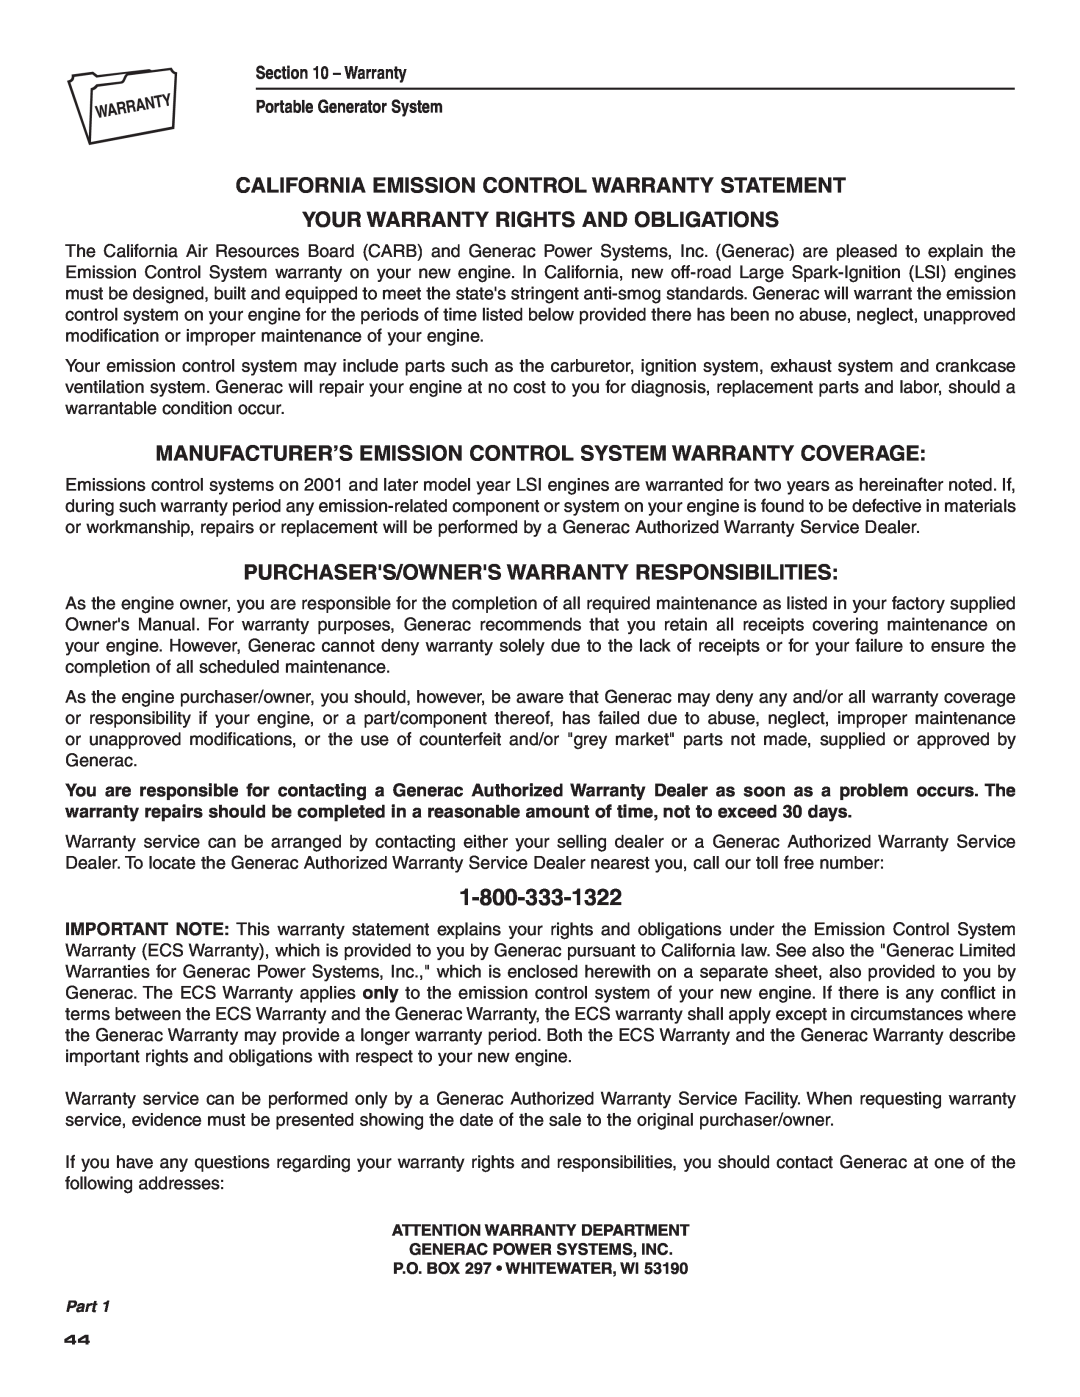 Guardian Technologies 004583-0 California Emission Control Warranty Statement, Your Warranty Rights And Obligations 